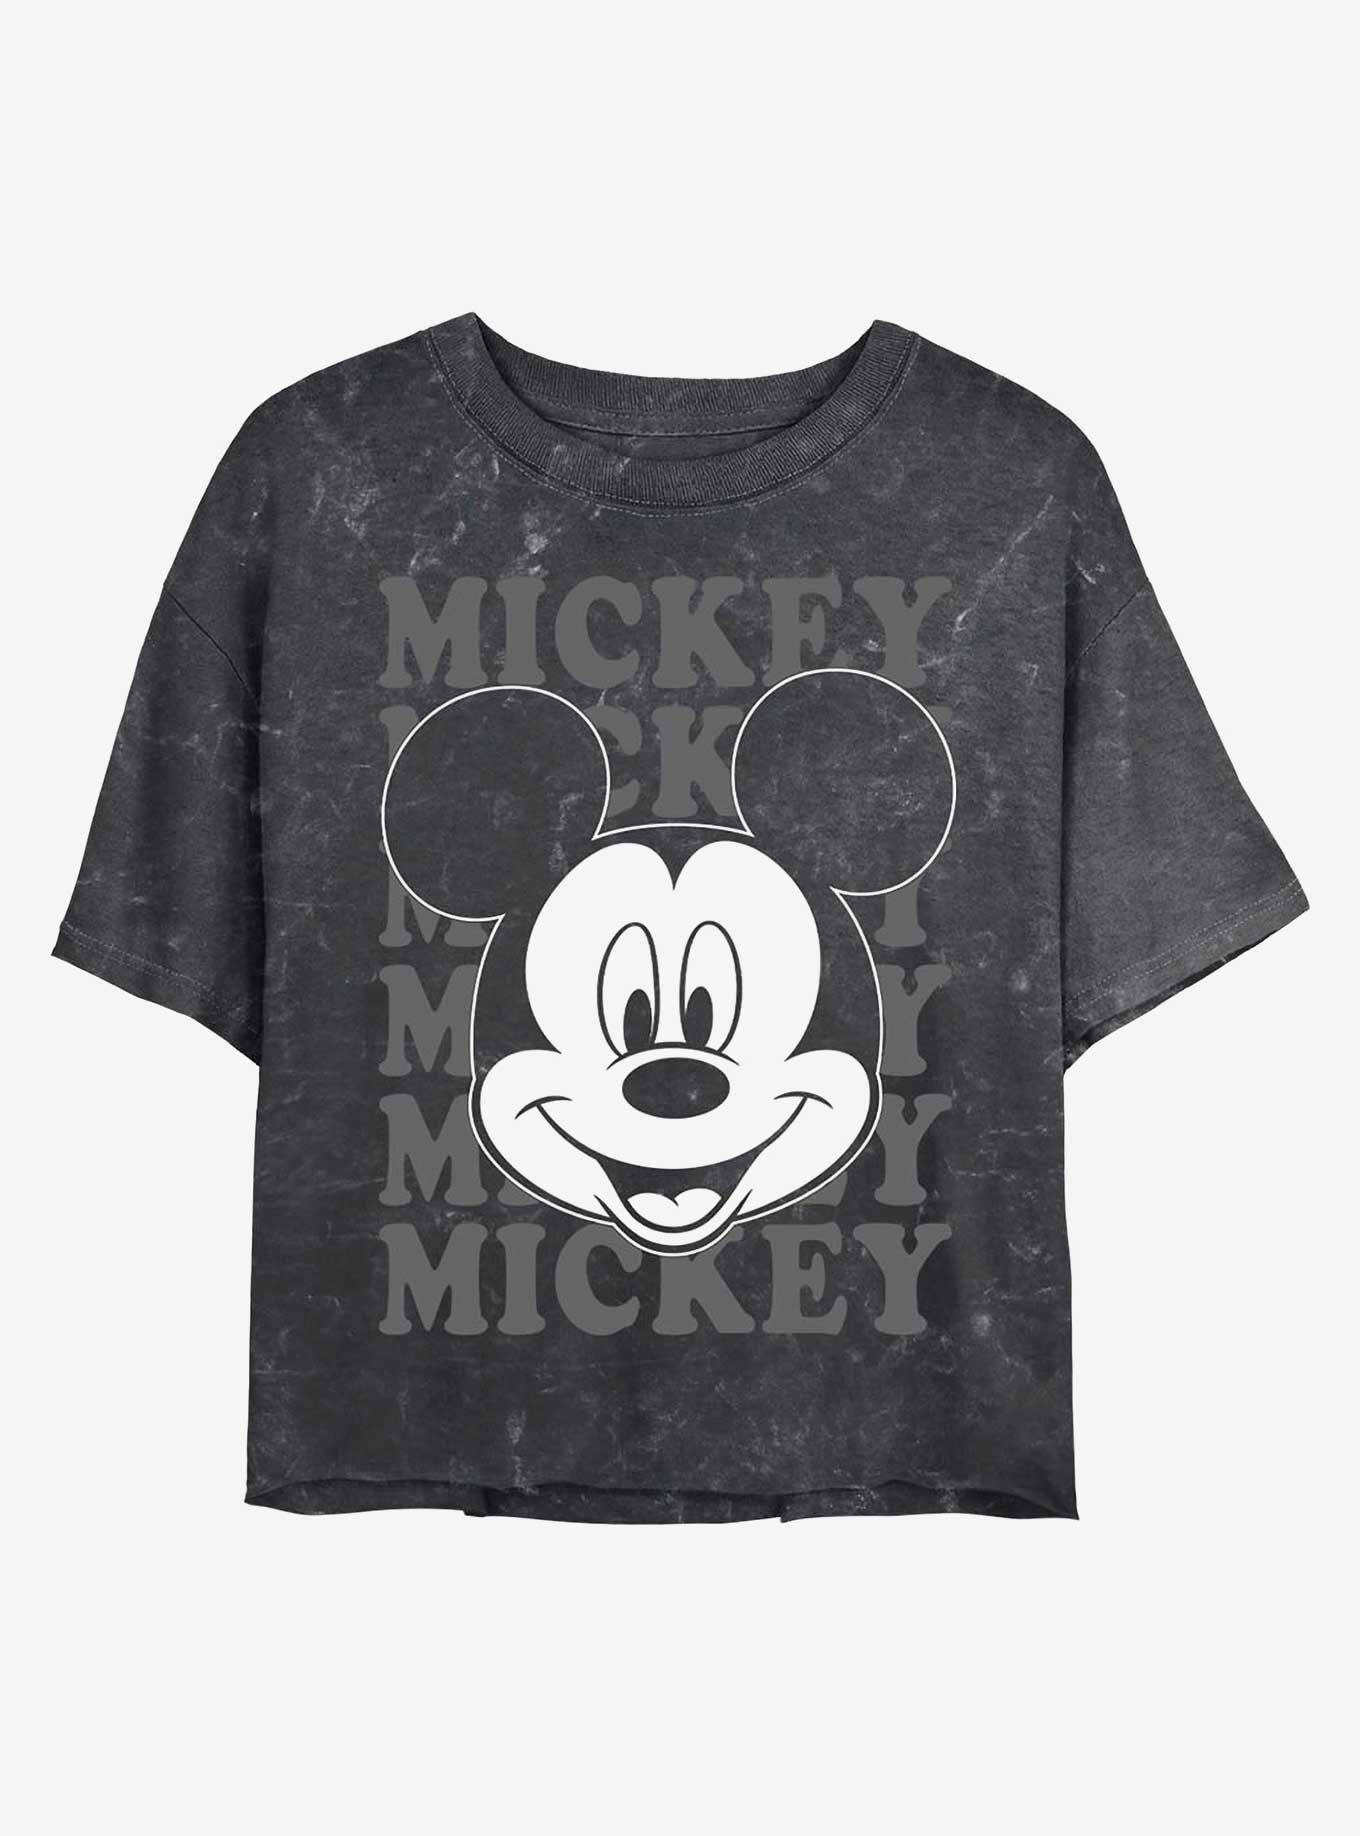 Disney Mickey Mouse Big Face Mineral Wash Crop Girls T-Shirt